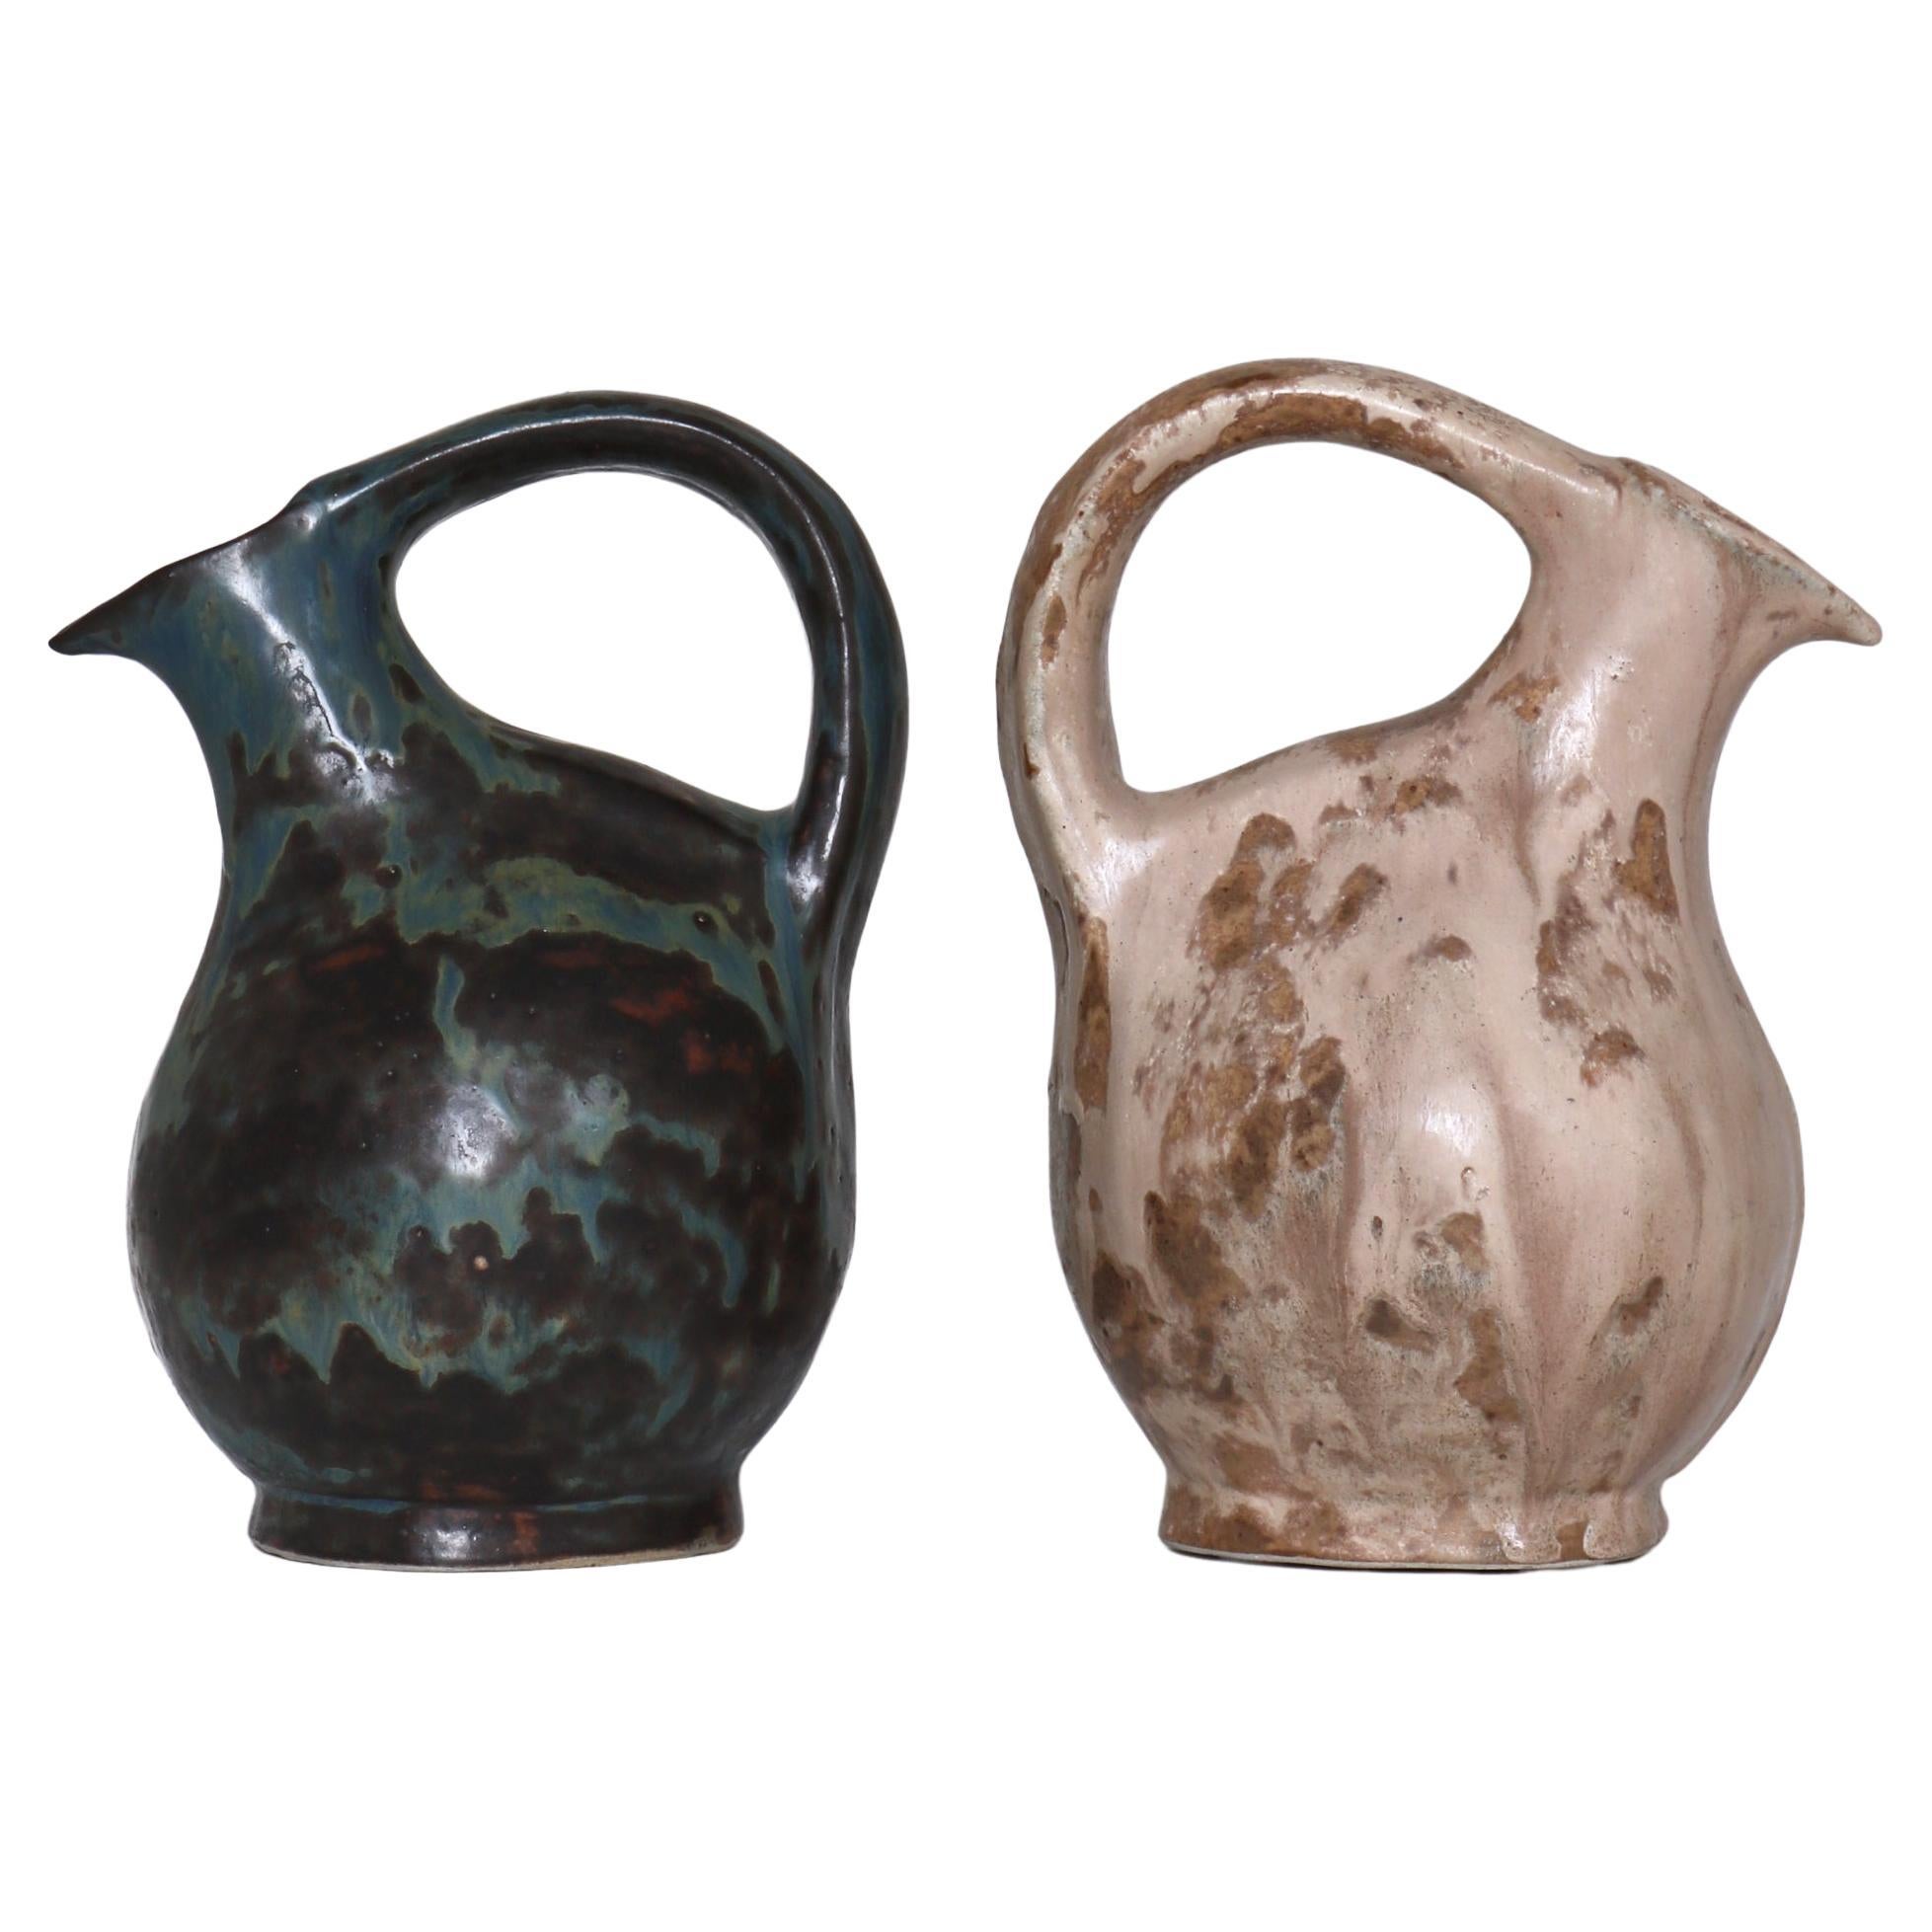 Pair of Unique Bode Willumsen Ceramic Pitchers from Own Studio, 1930s For Sale